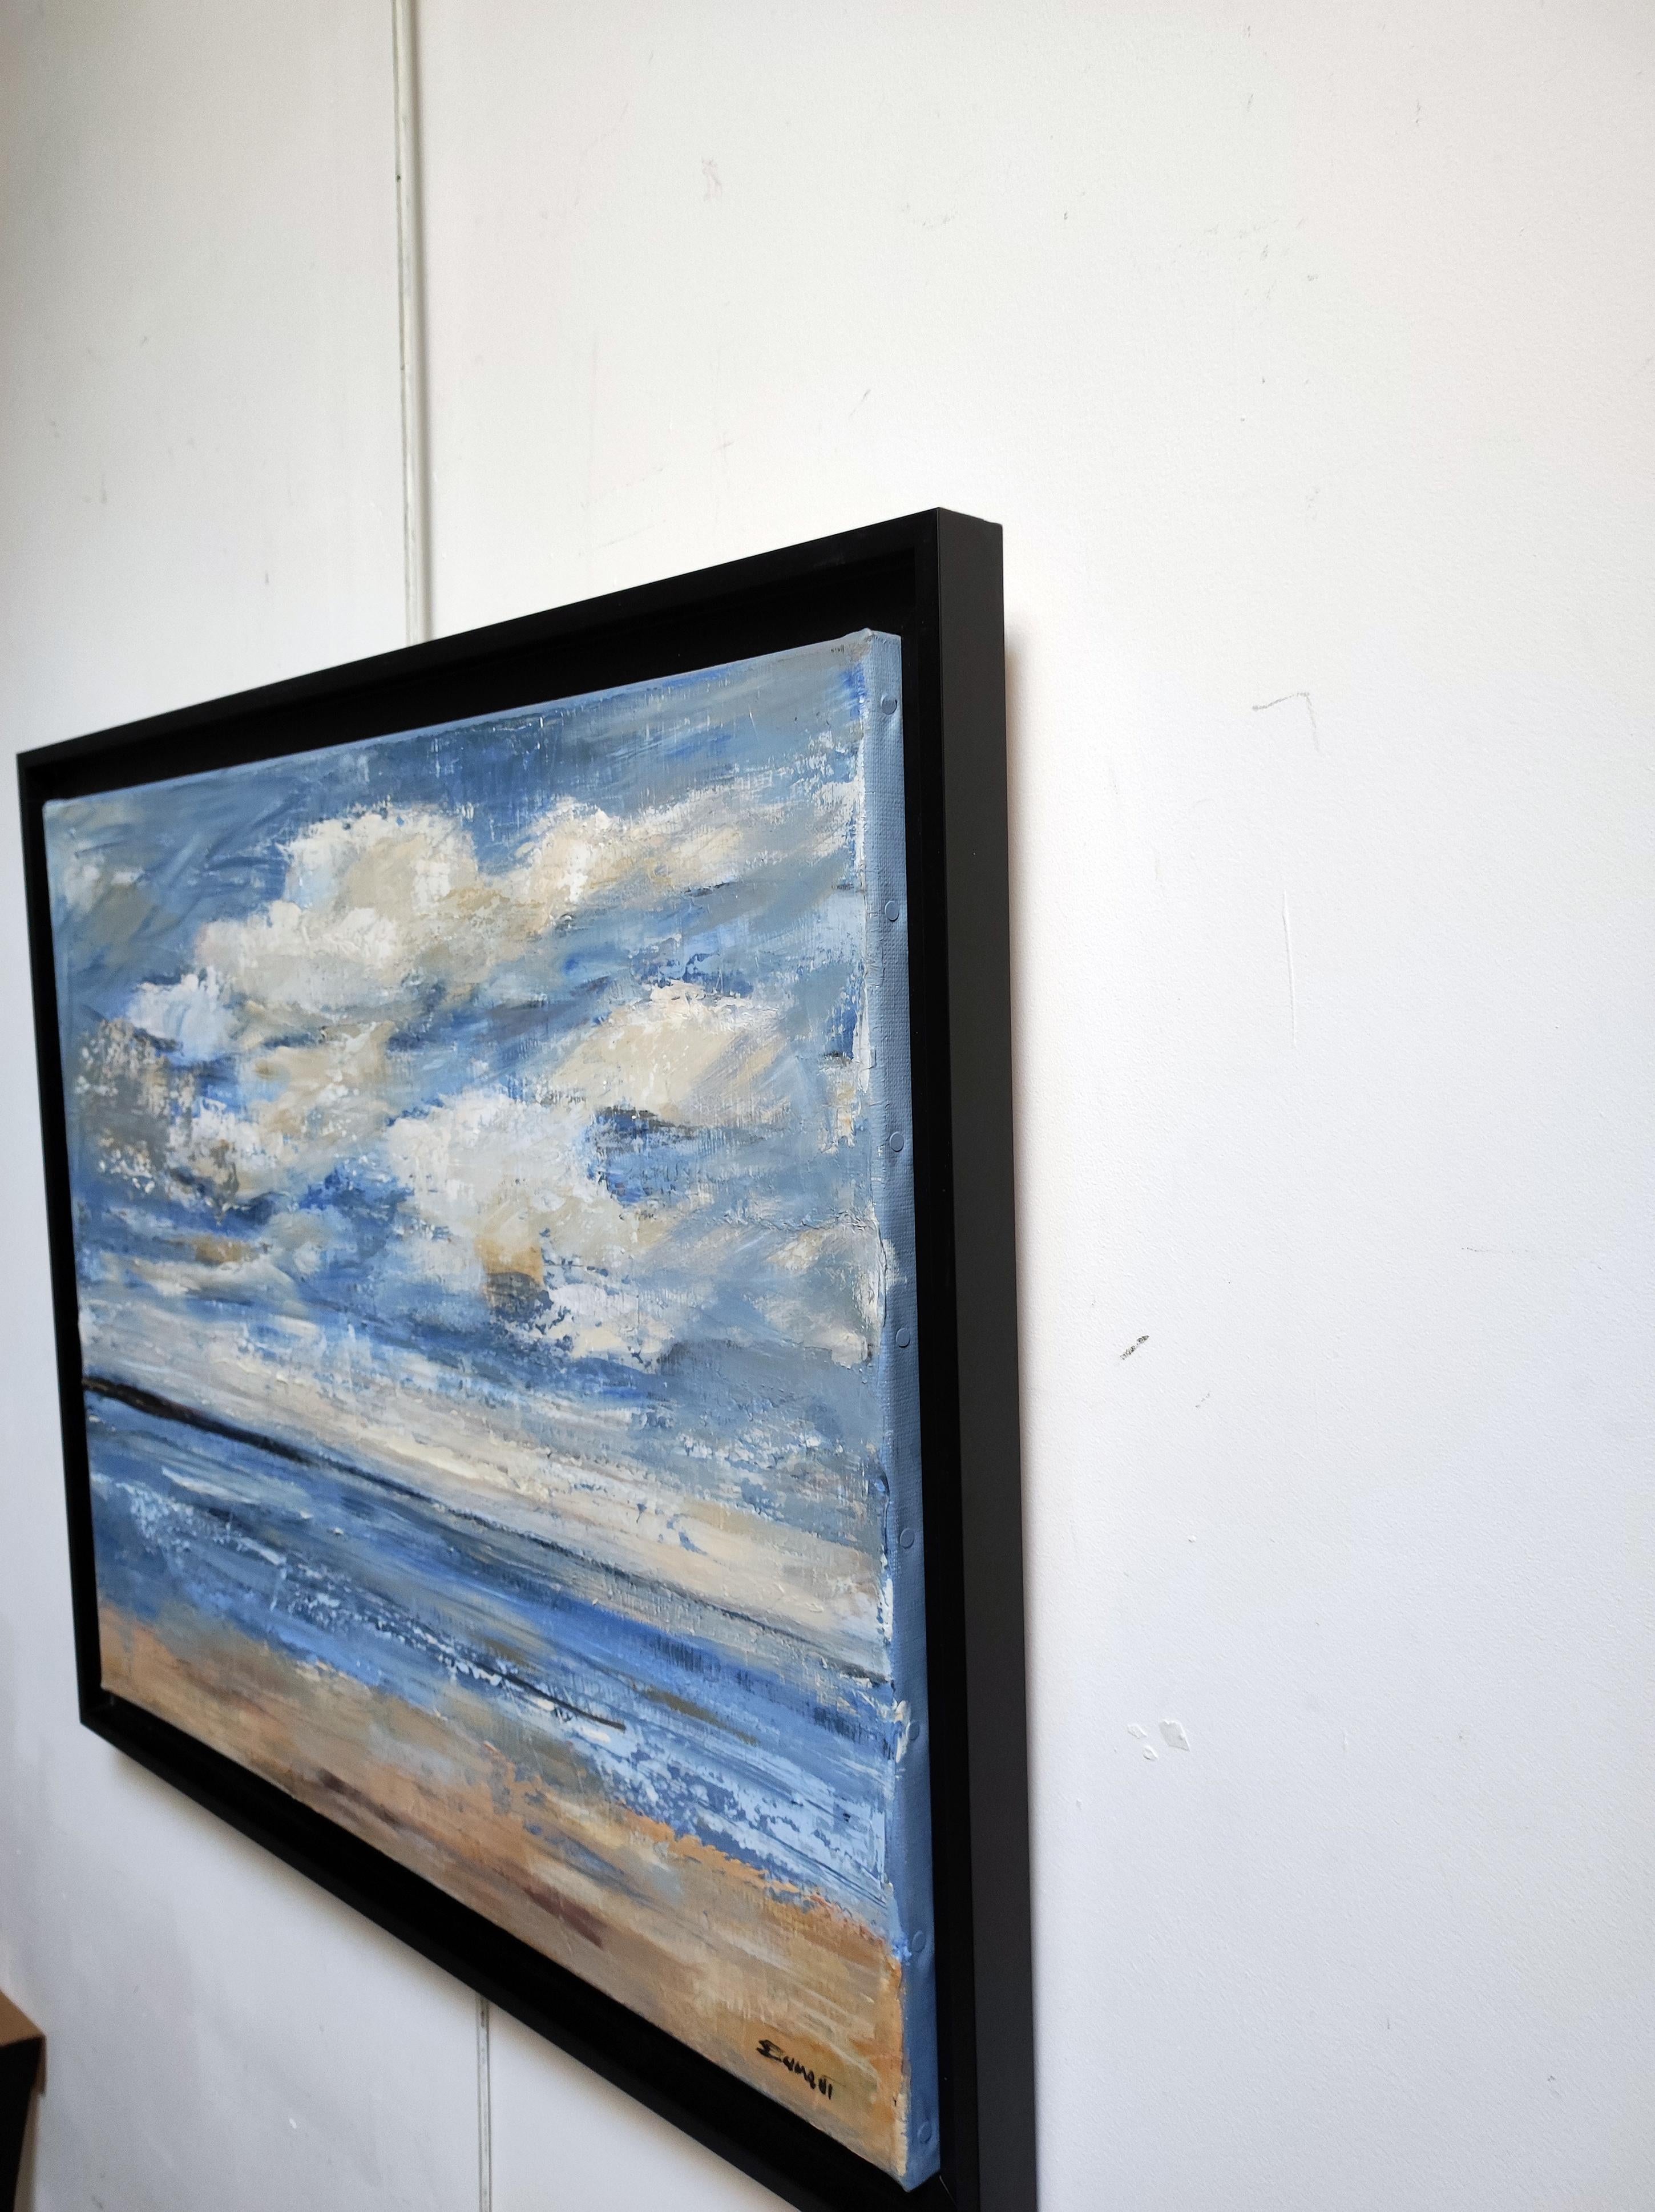 Abstract seaside, expressionist worked in oil on linen canvas
Landscape, marine, between sky and sea, treated with oil and knife. The sky looks like a free variation bordering on abstraction.
The sky is painted in full paste in a brightly colored